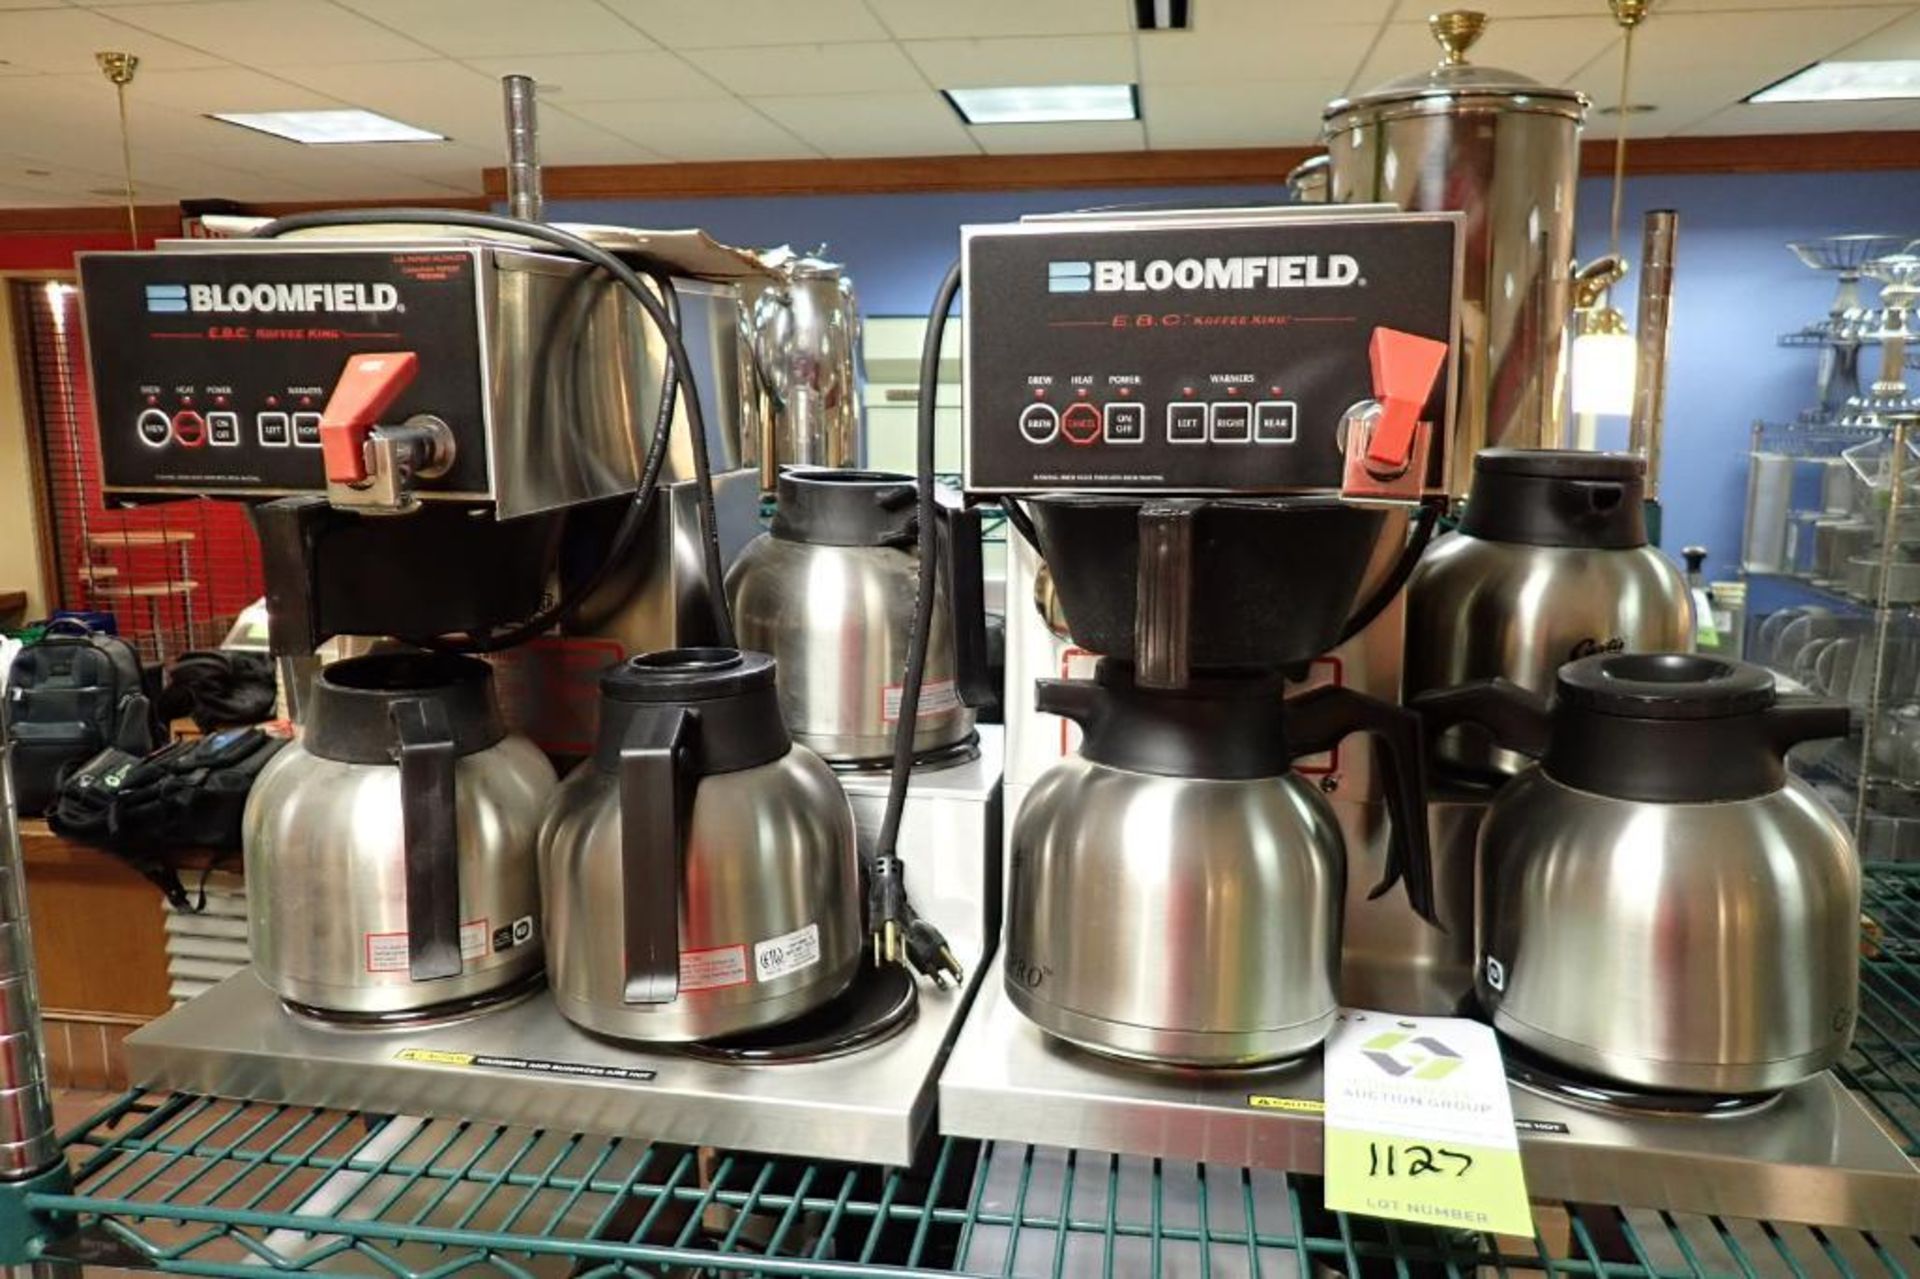 Bloomfield coffee maker with 2 coffee pots